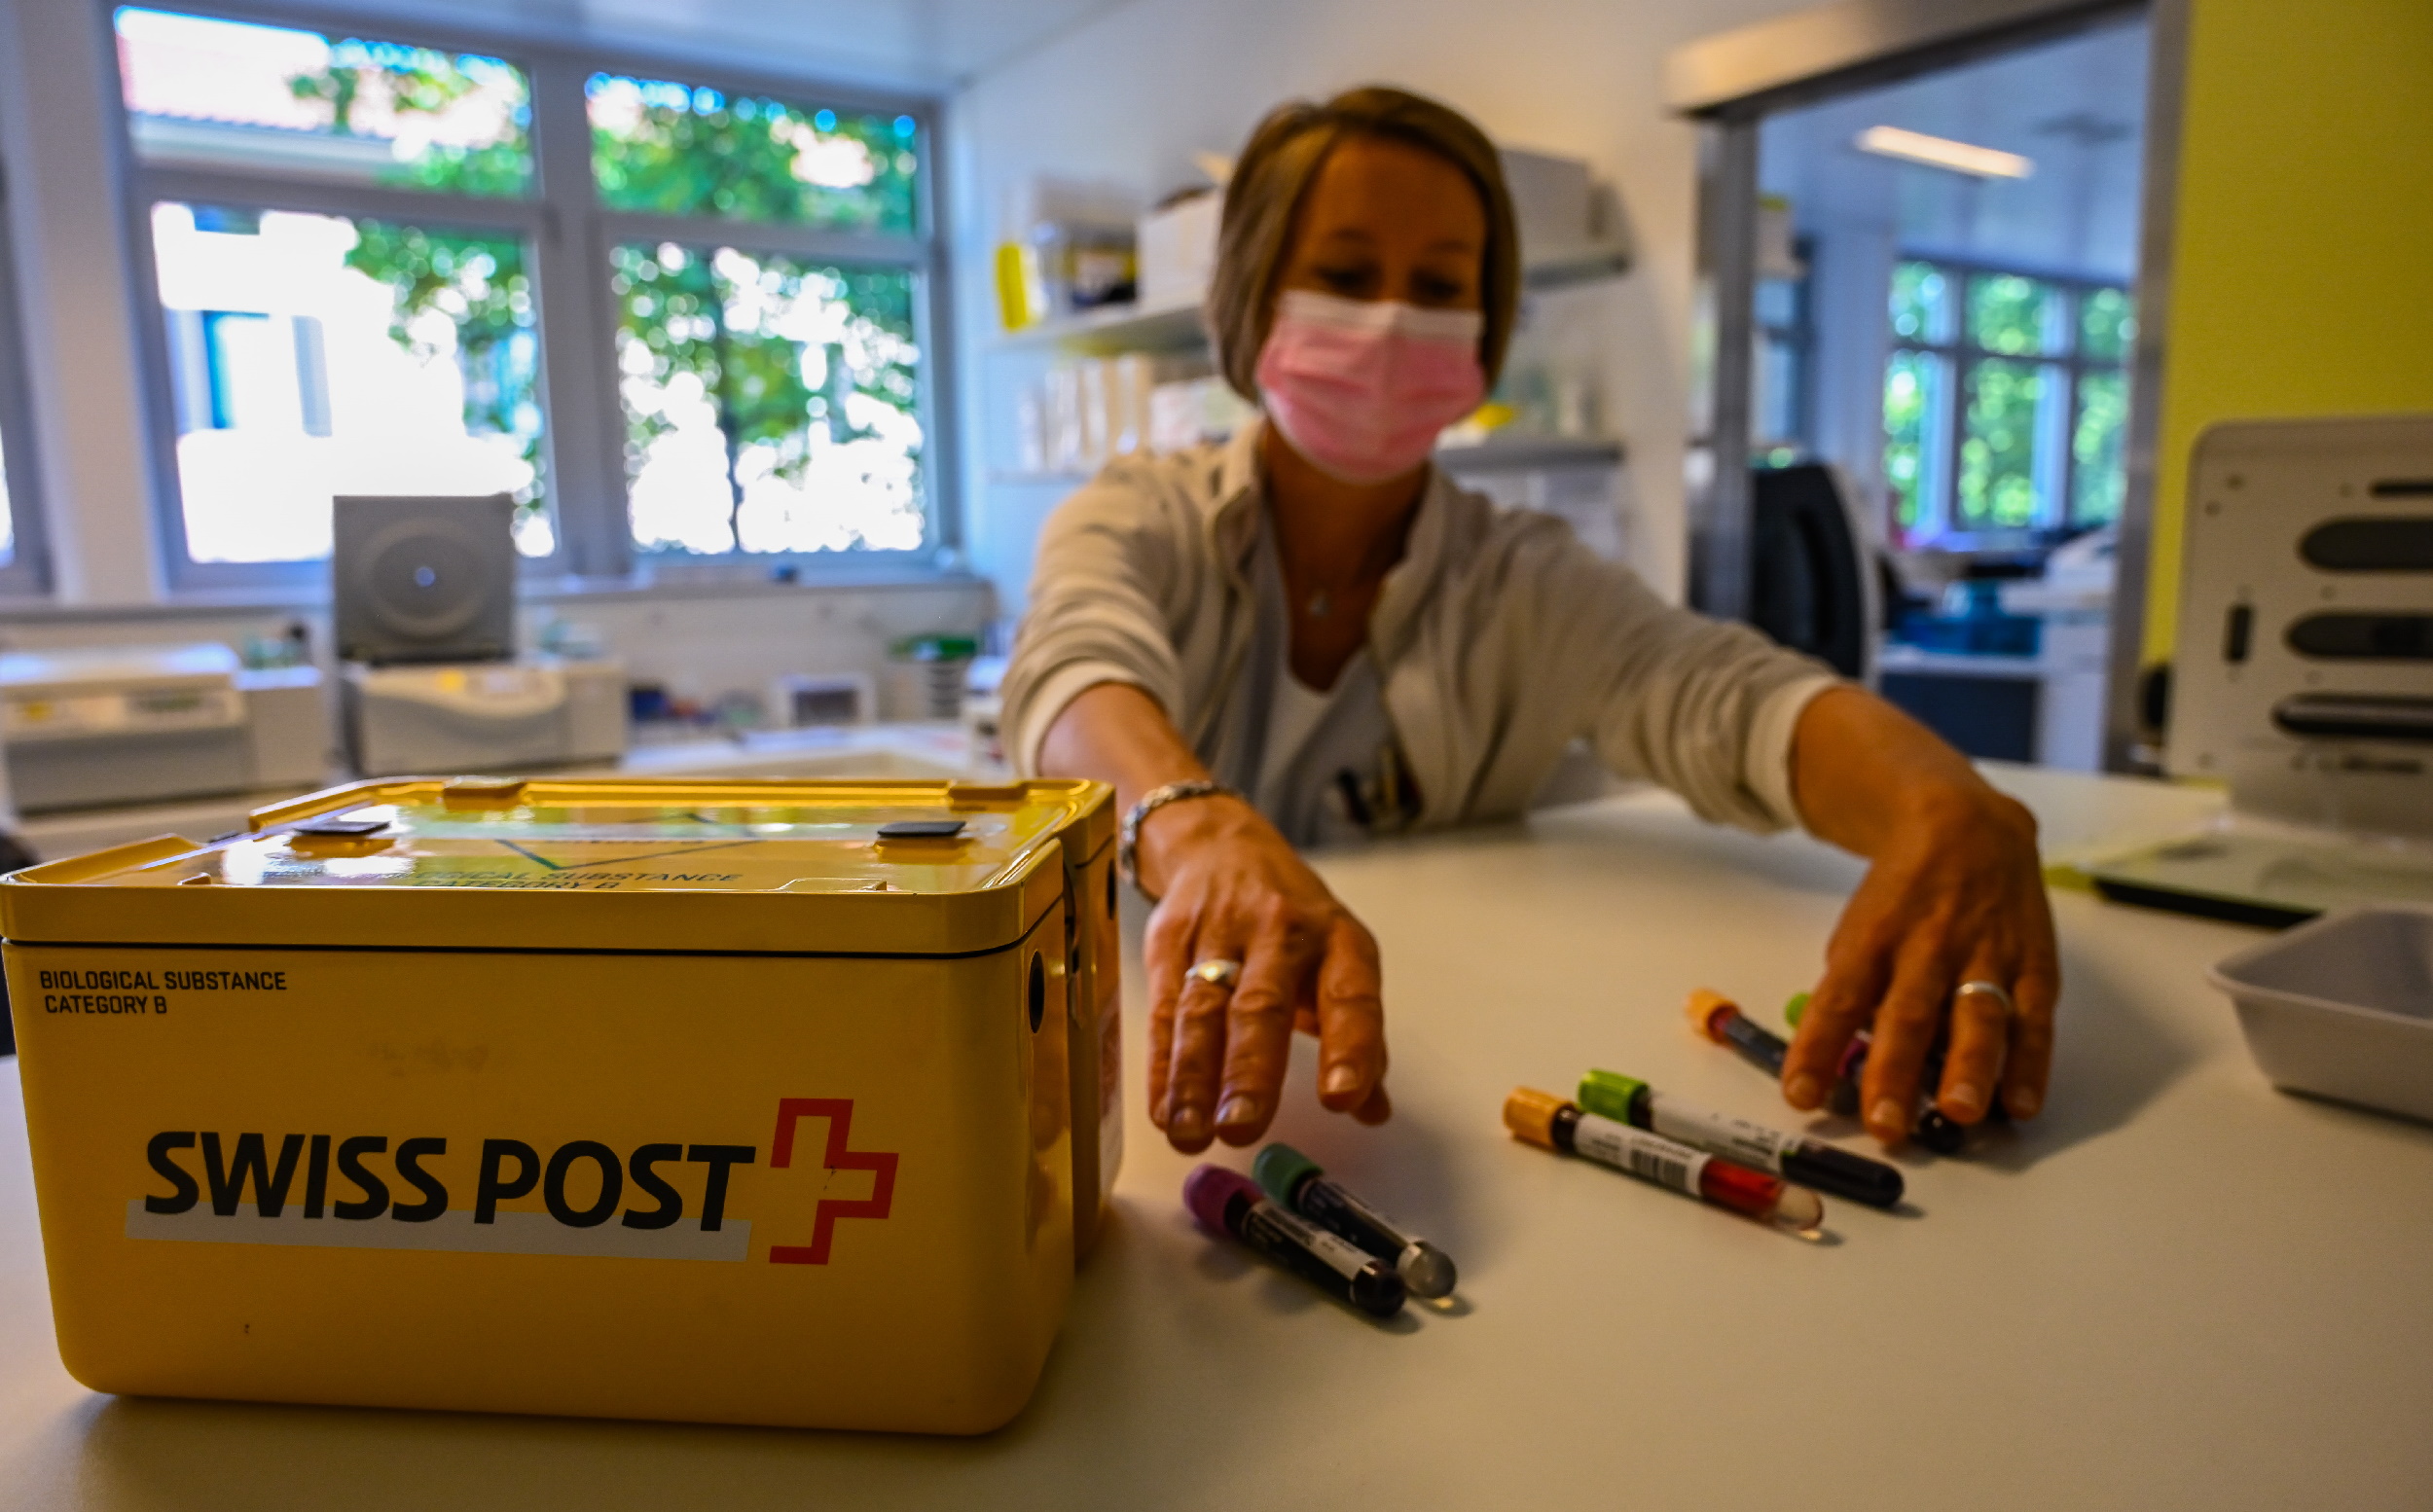 A woman sorts vials to put in a SwissPost carrier for a drone to take to another facility.